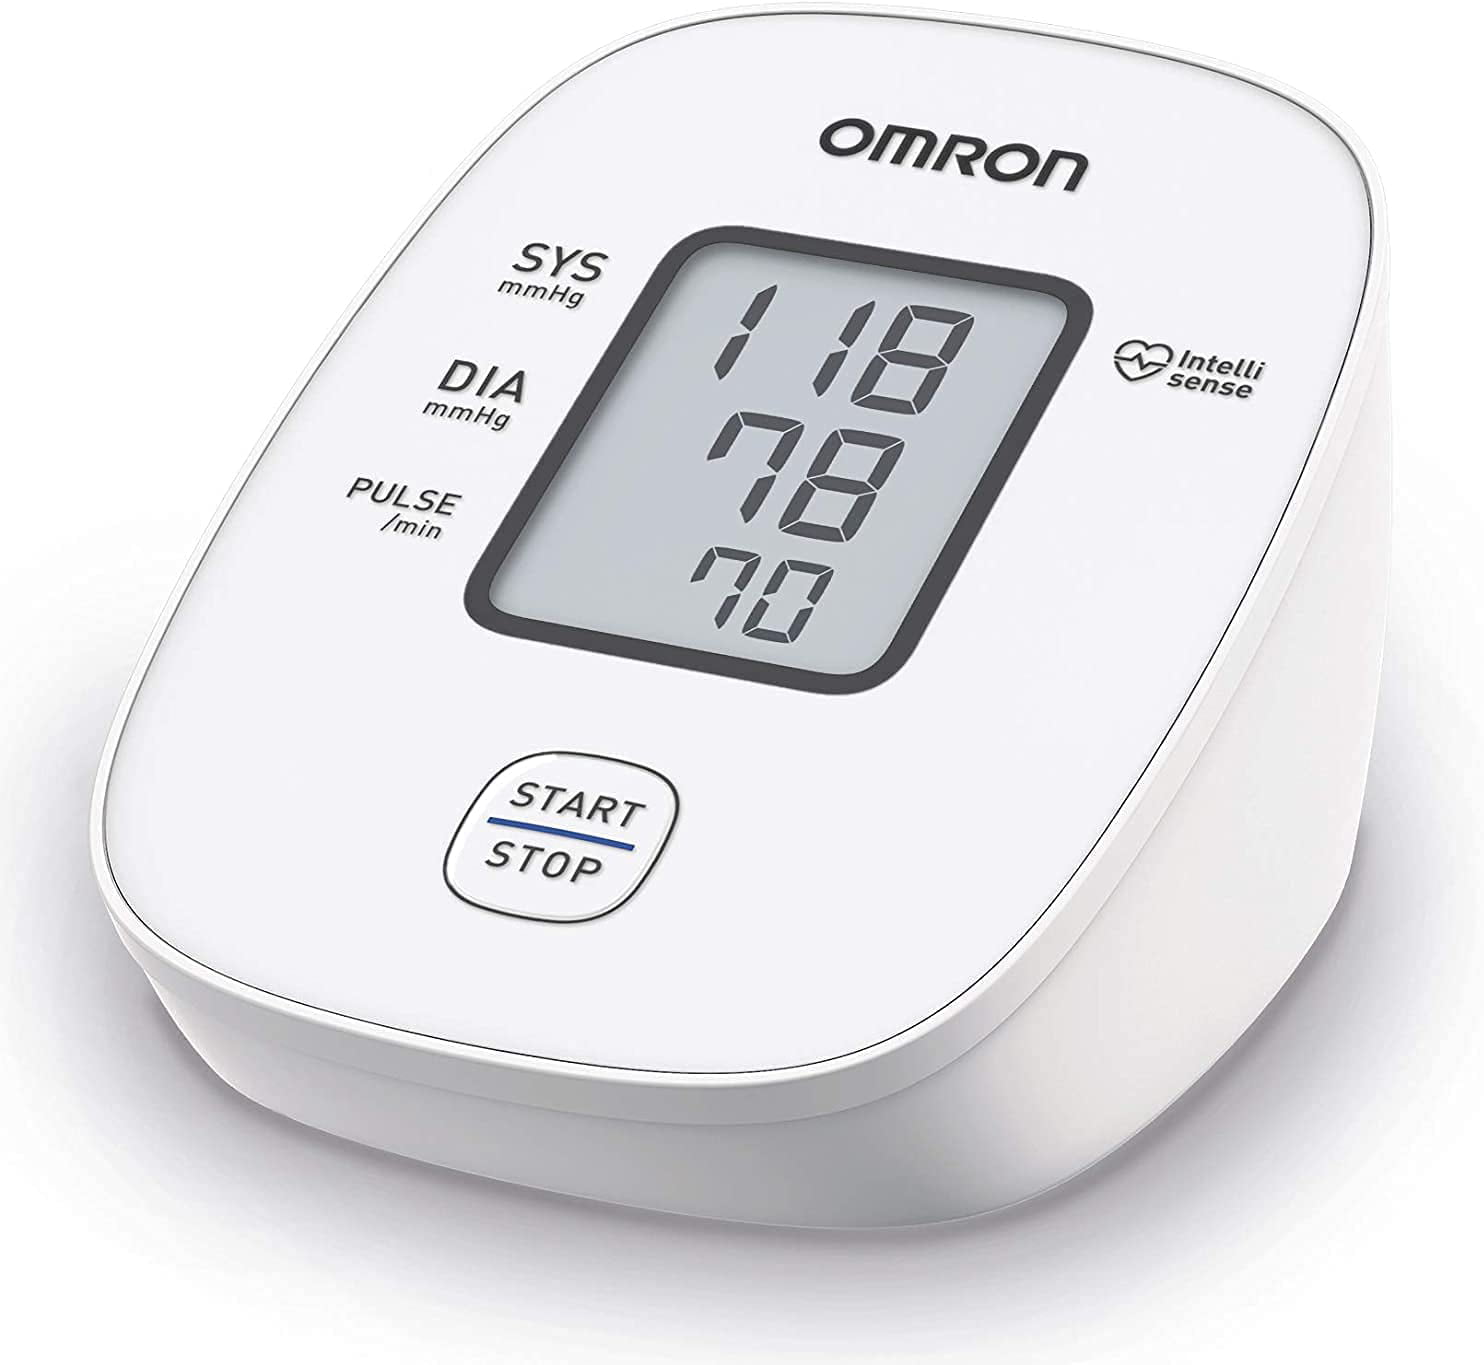 OMRON Basic – Automatic Upper Arm blood pressure monitor for home